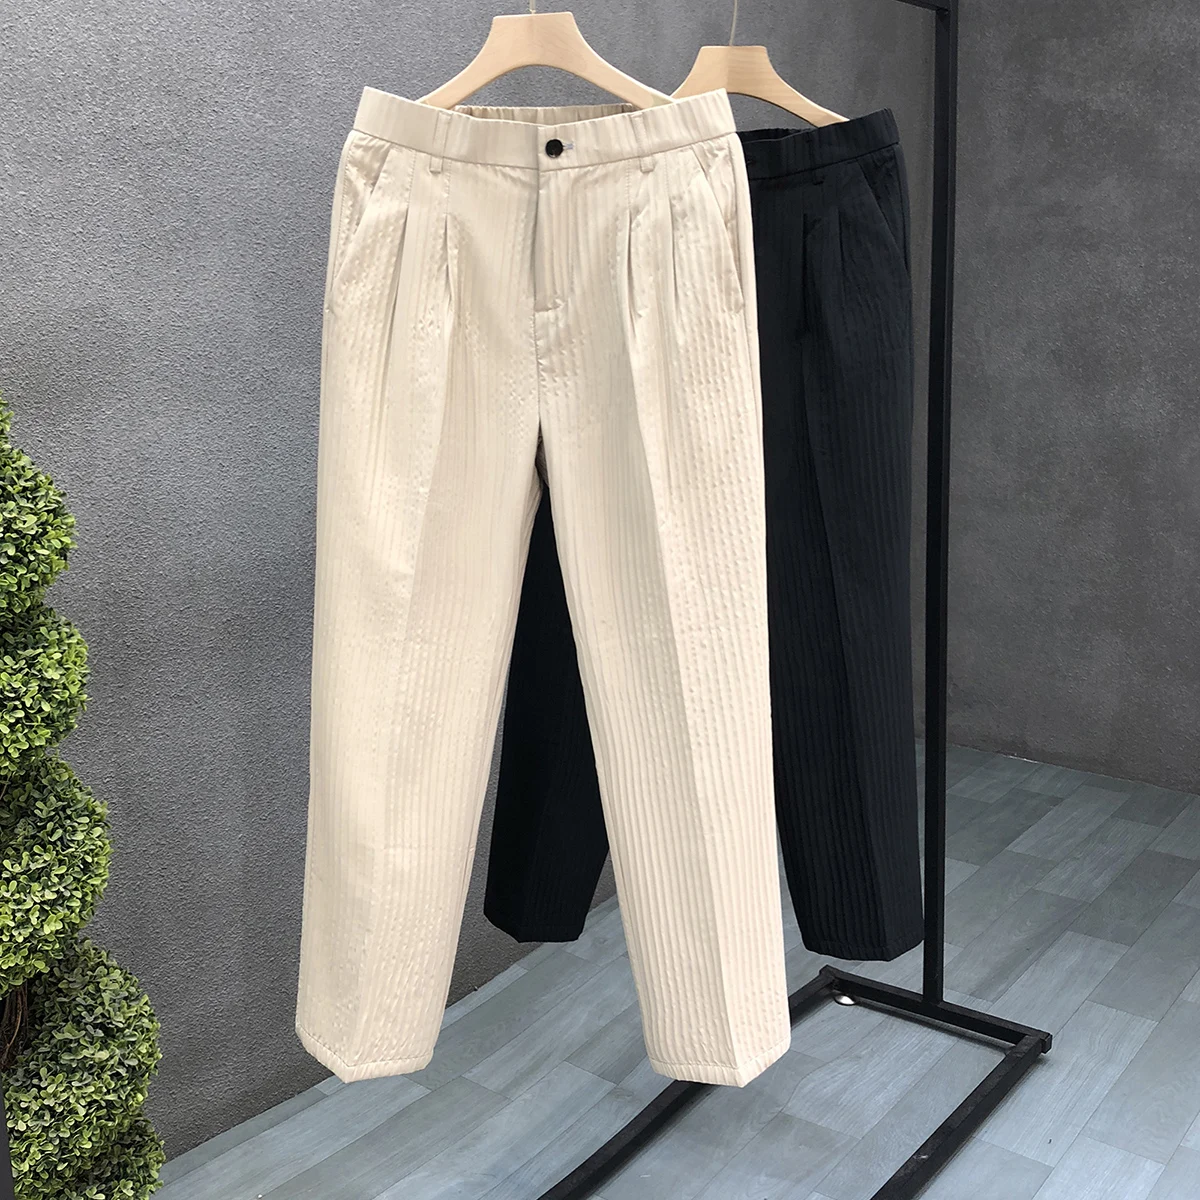 

Men's Casual All-In-One Solid Color Suit Pants Merchant Formal Elastic Waist Comfortable Slim Camping Trip Talk Pants A385